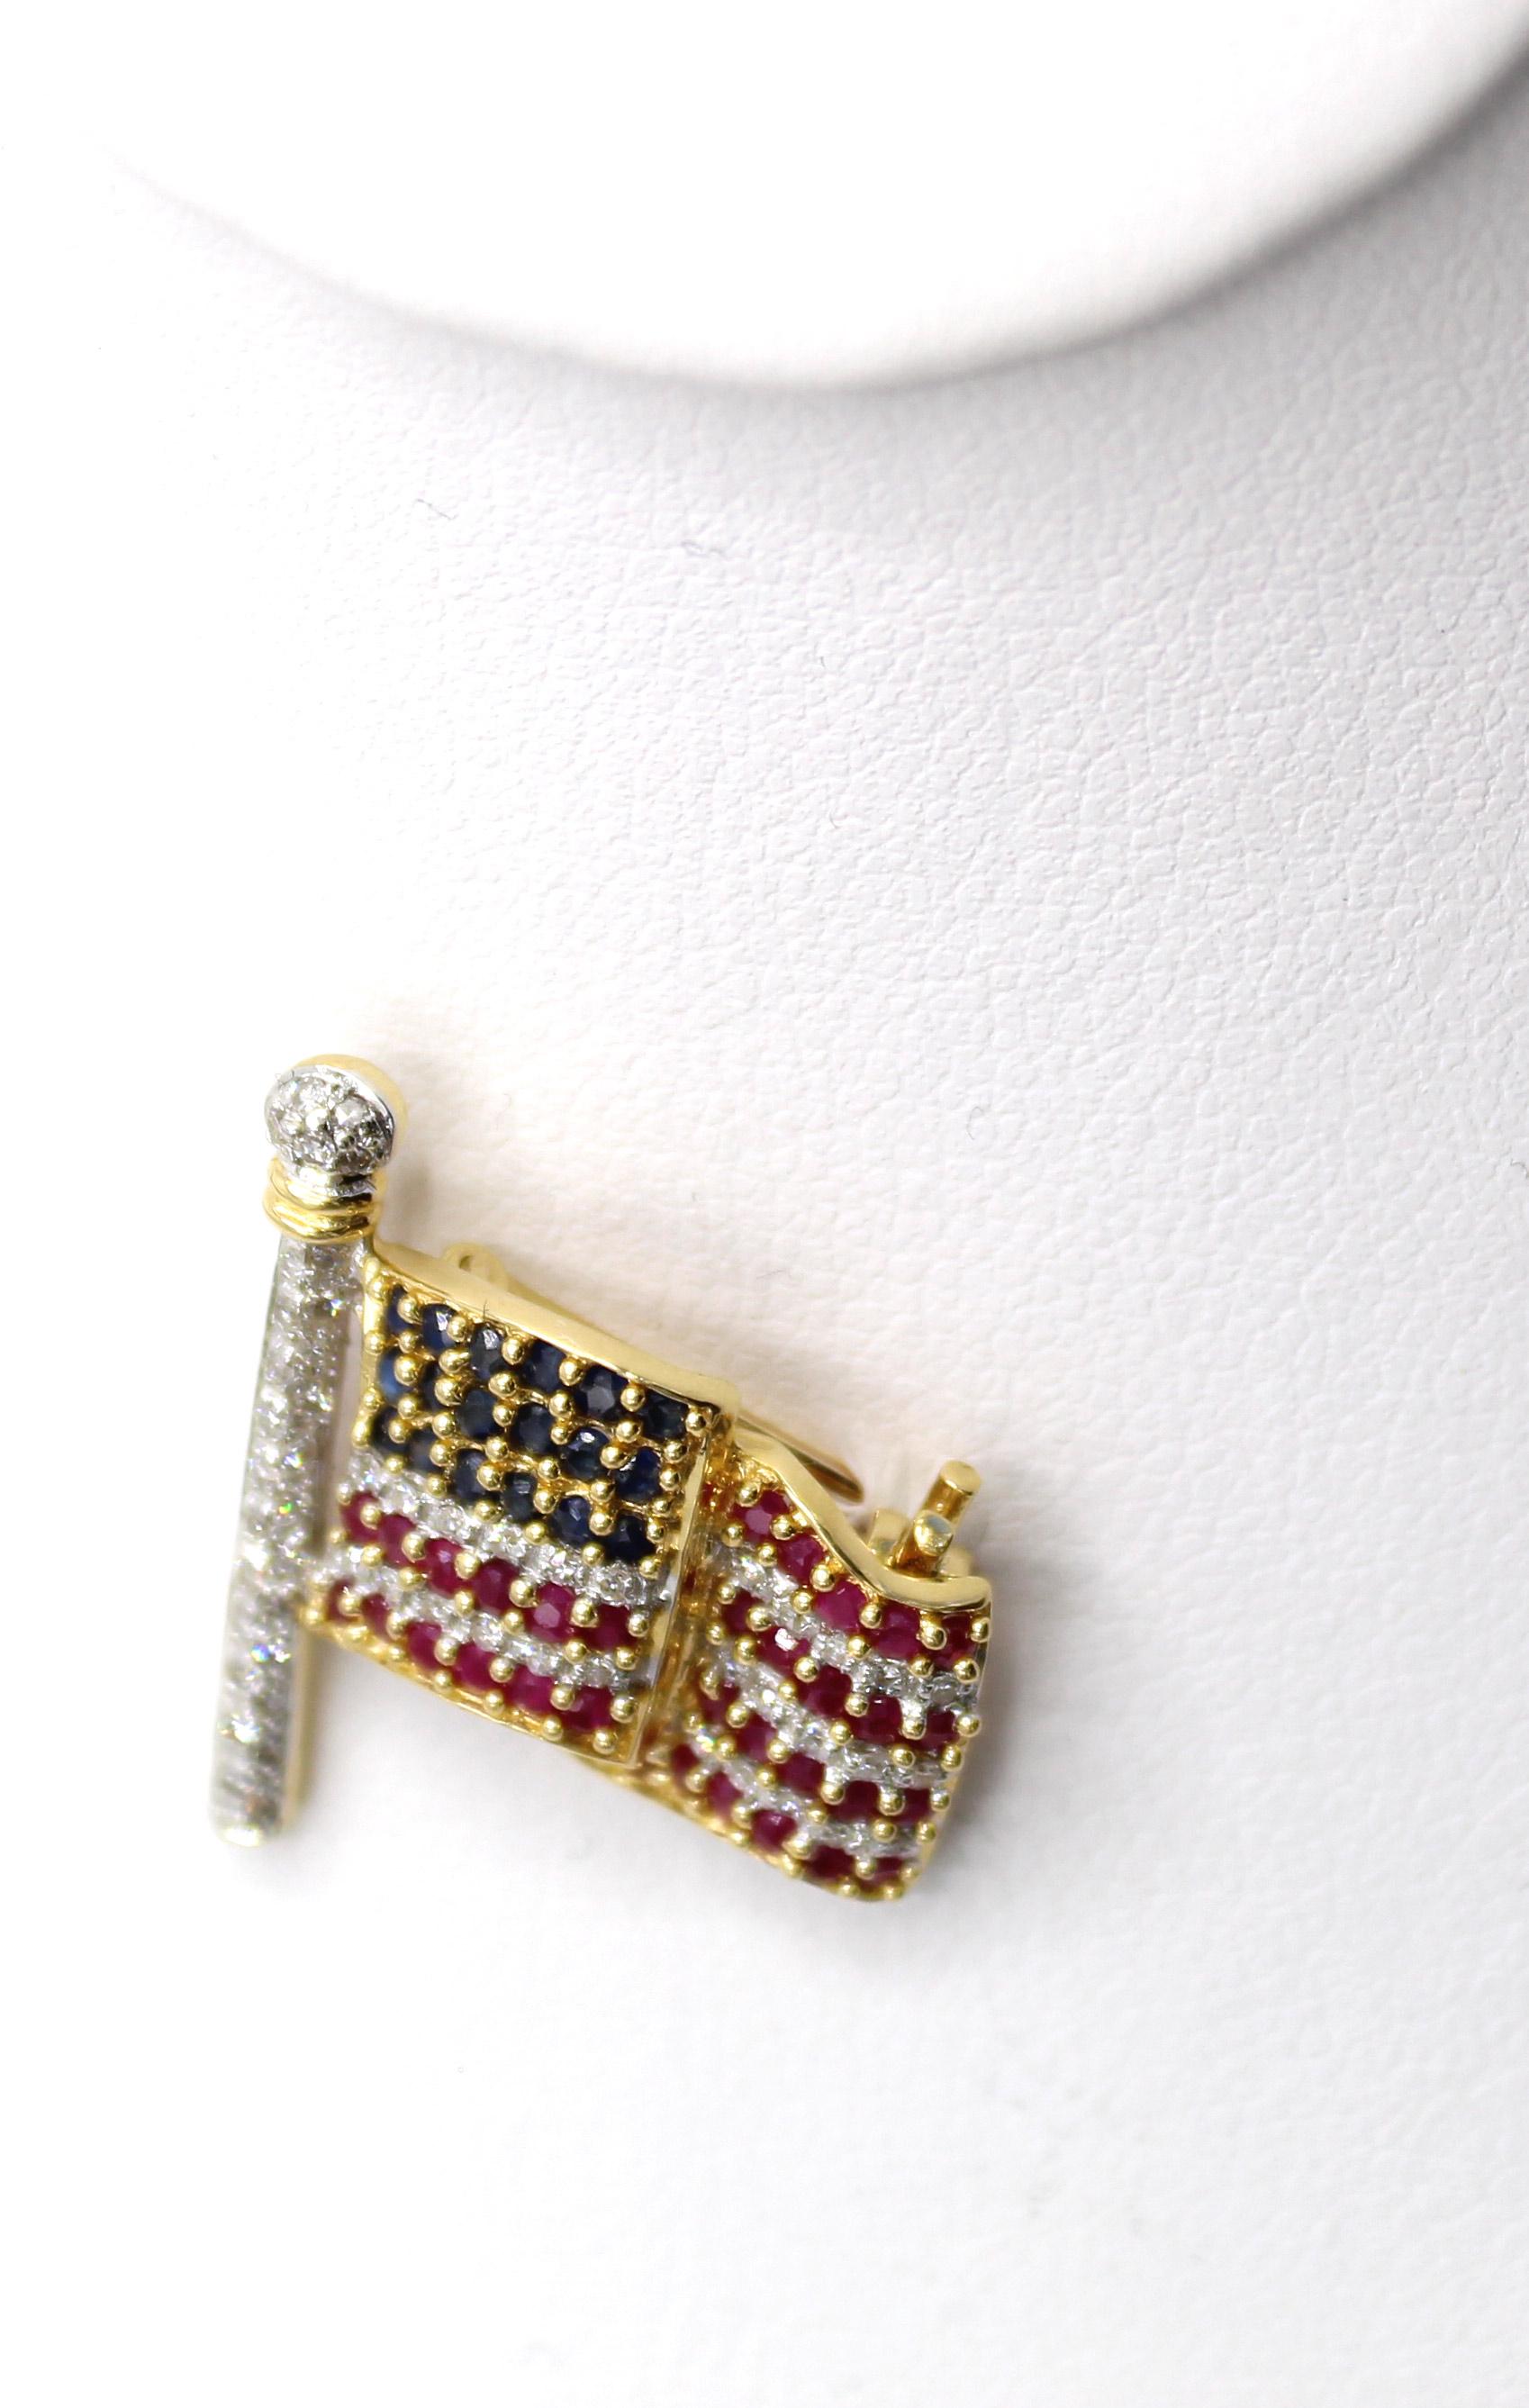 Beautifully designed and masterfully handcrafted this American flag pin seems to be flowing in the wind. Set with matched round diamonds, sapphires and rubies, all in 18 karat white and yellow gold, this pin is a colorful and decorative everyday